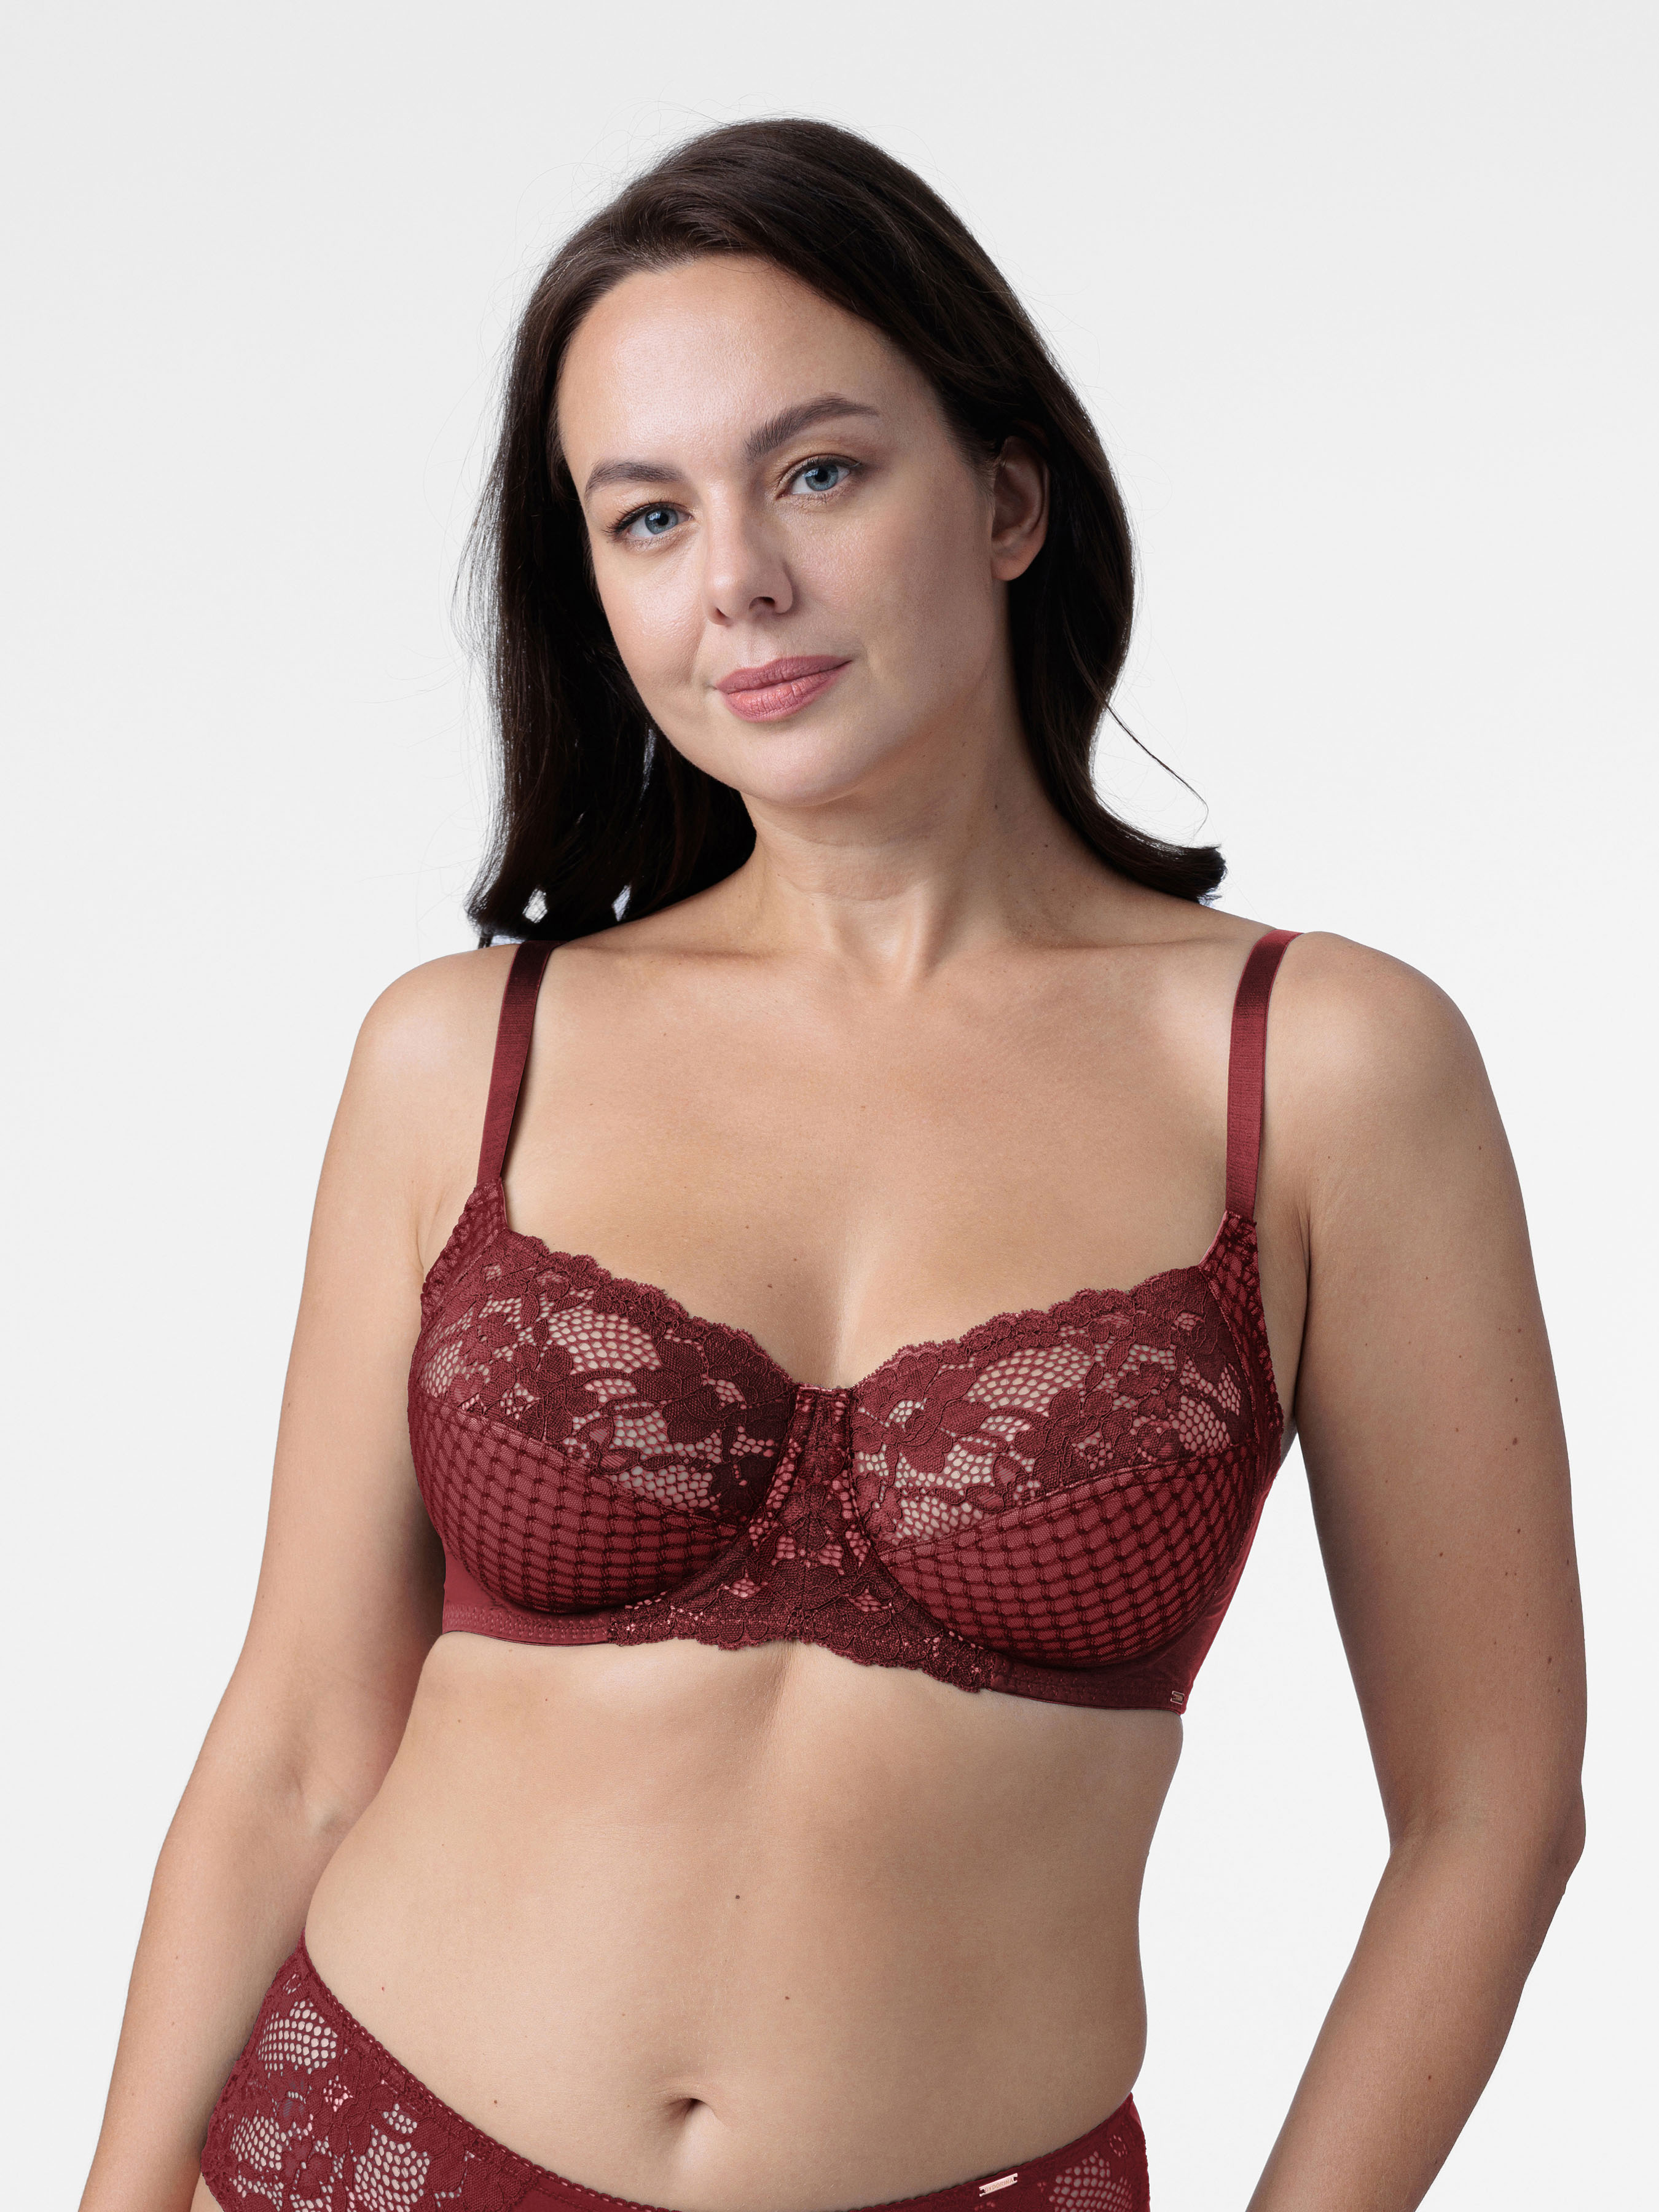 Infiore Padded non-wired bra DARLING cup B: for sale at 11.04€ on